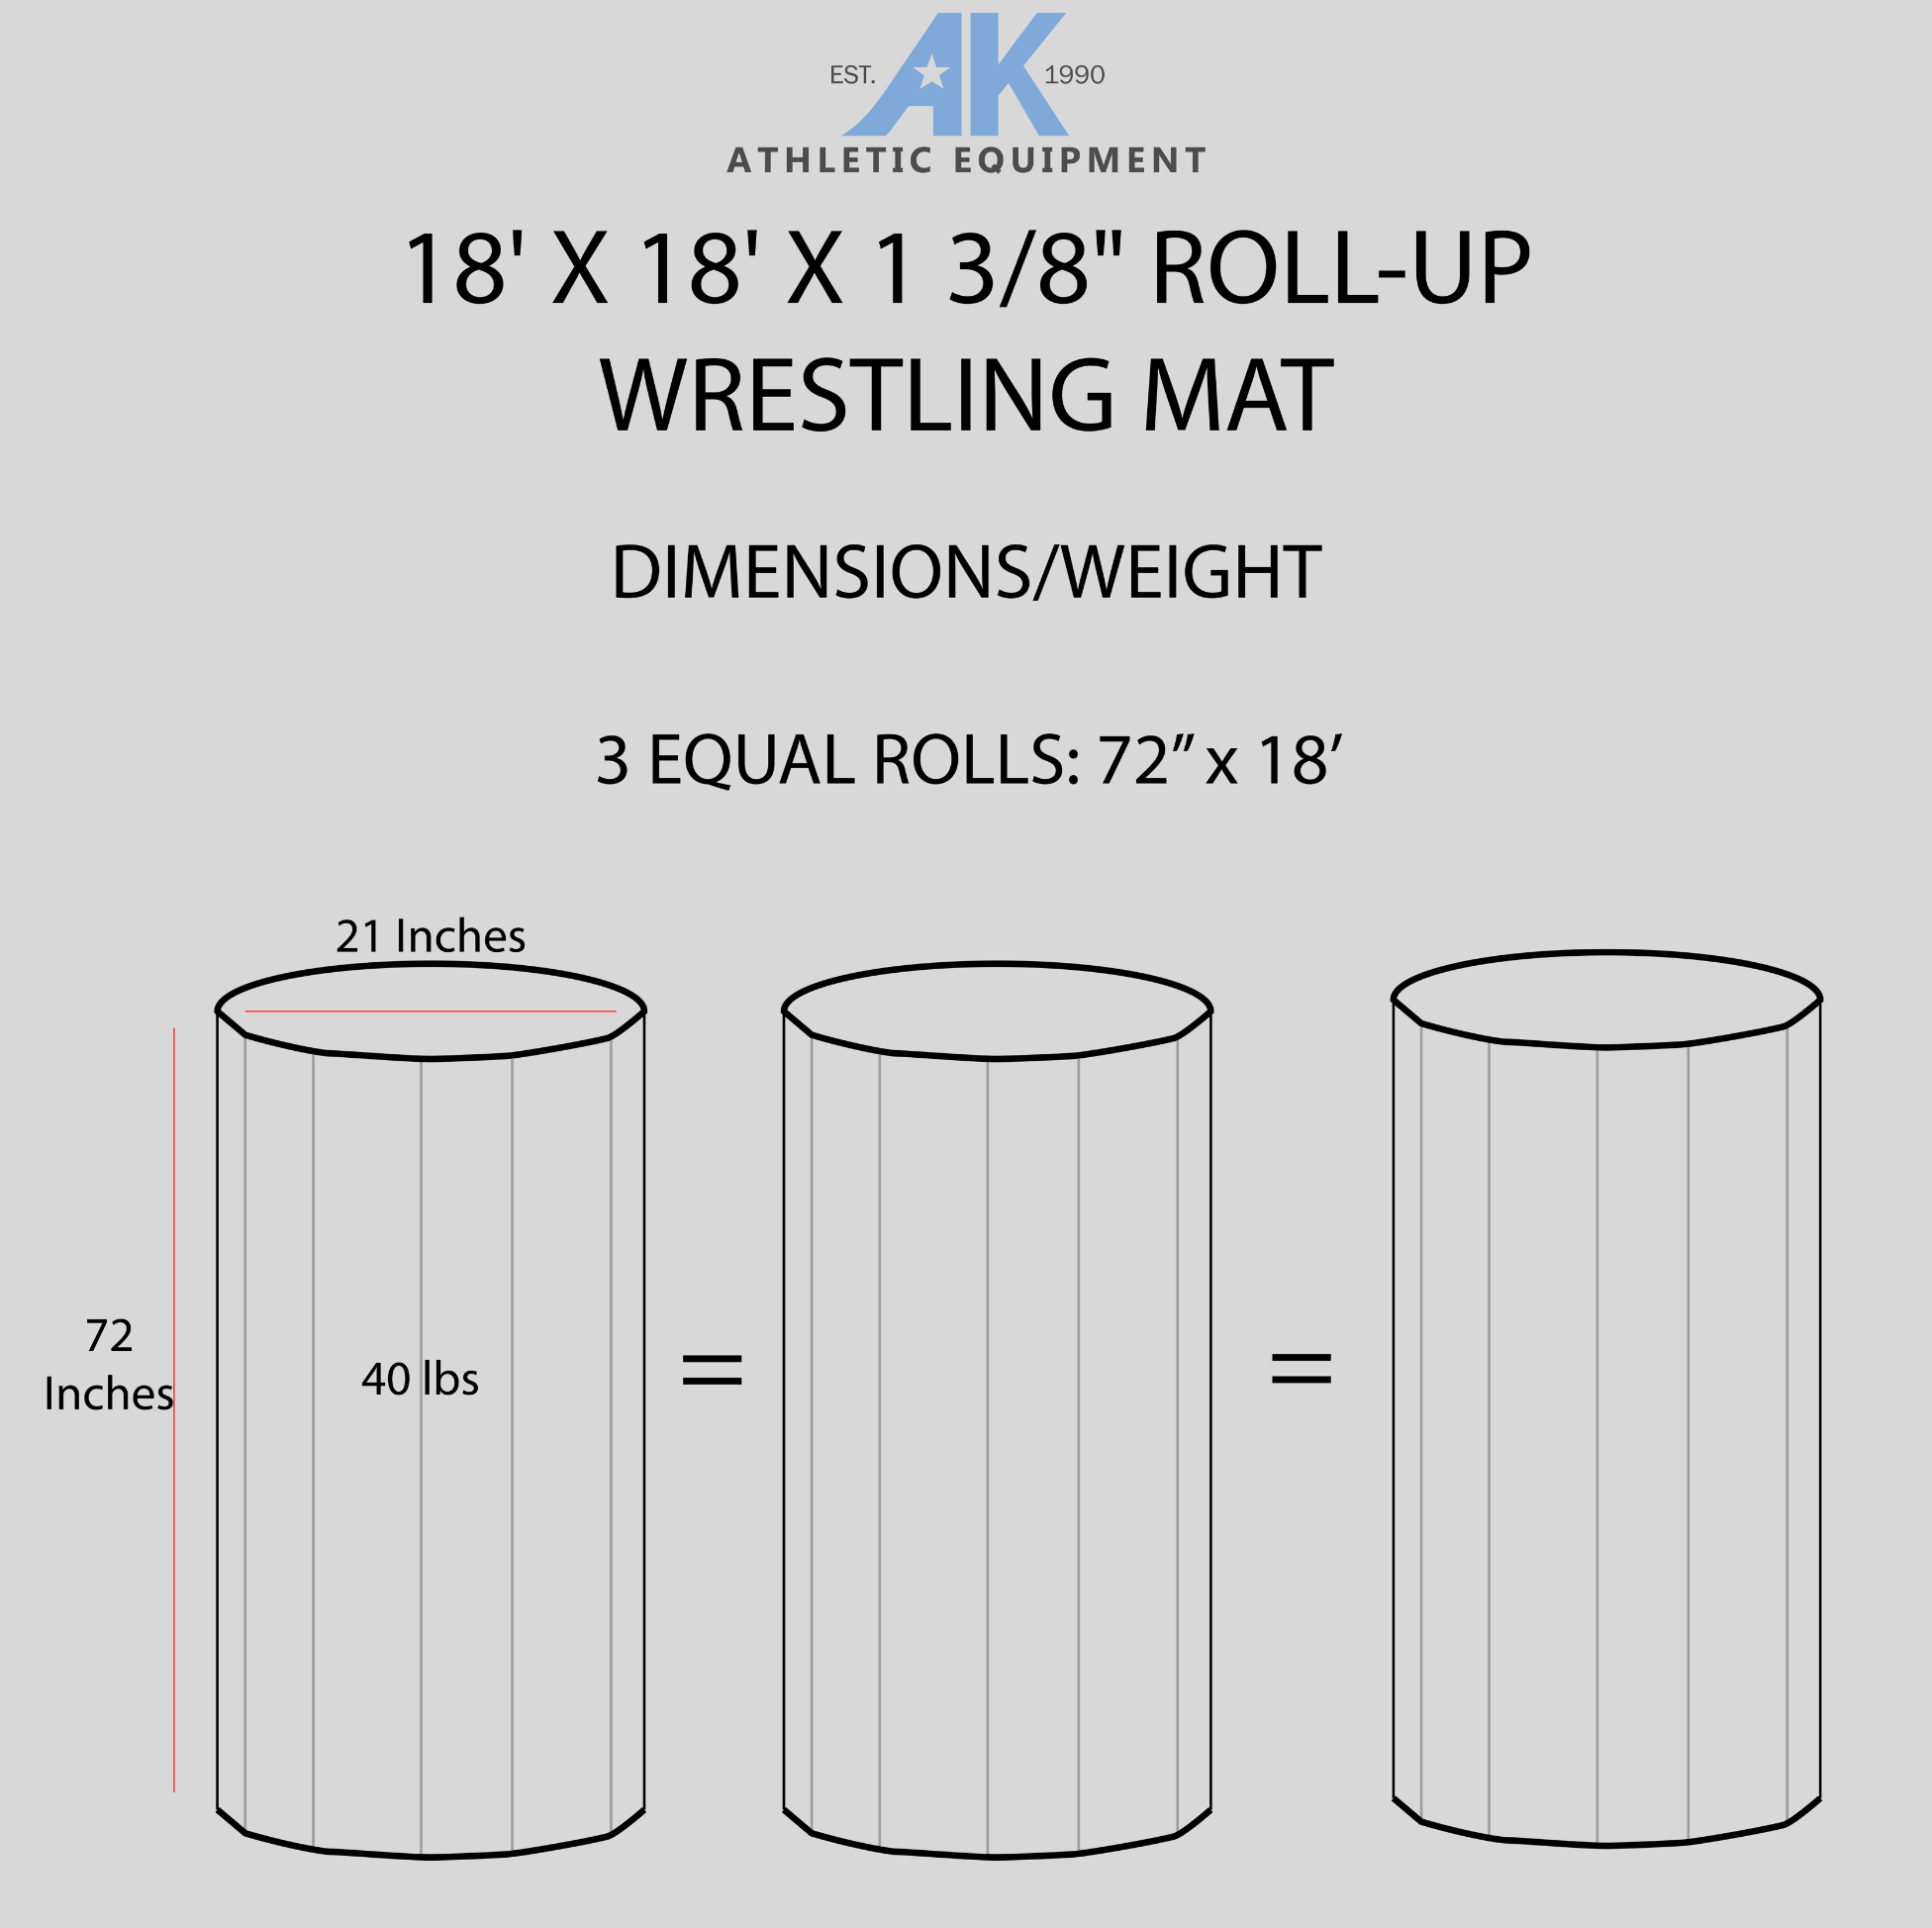 AK Athletics roll-up wrestling mat / mixed martial arts mats dimensional storage sheets. Custom sizes are available. 